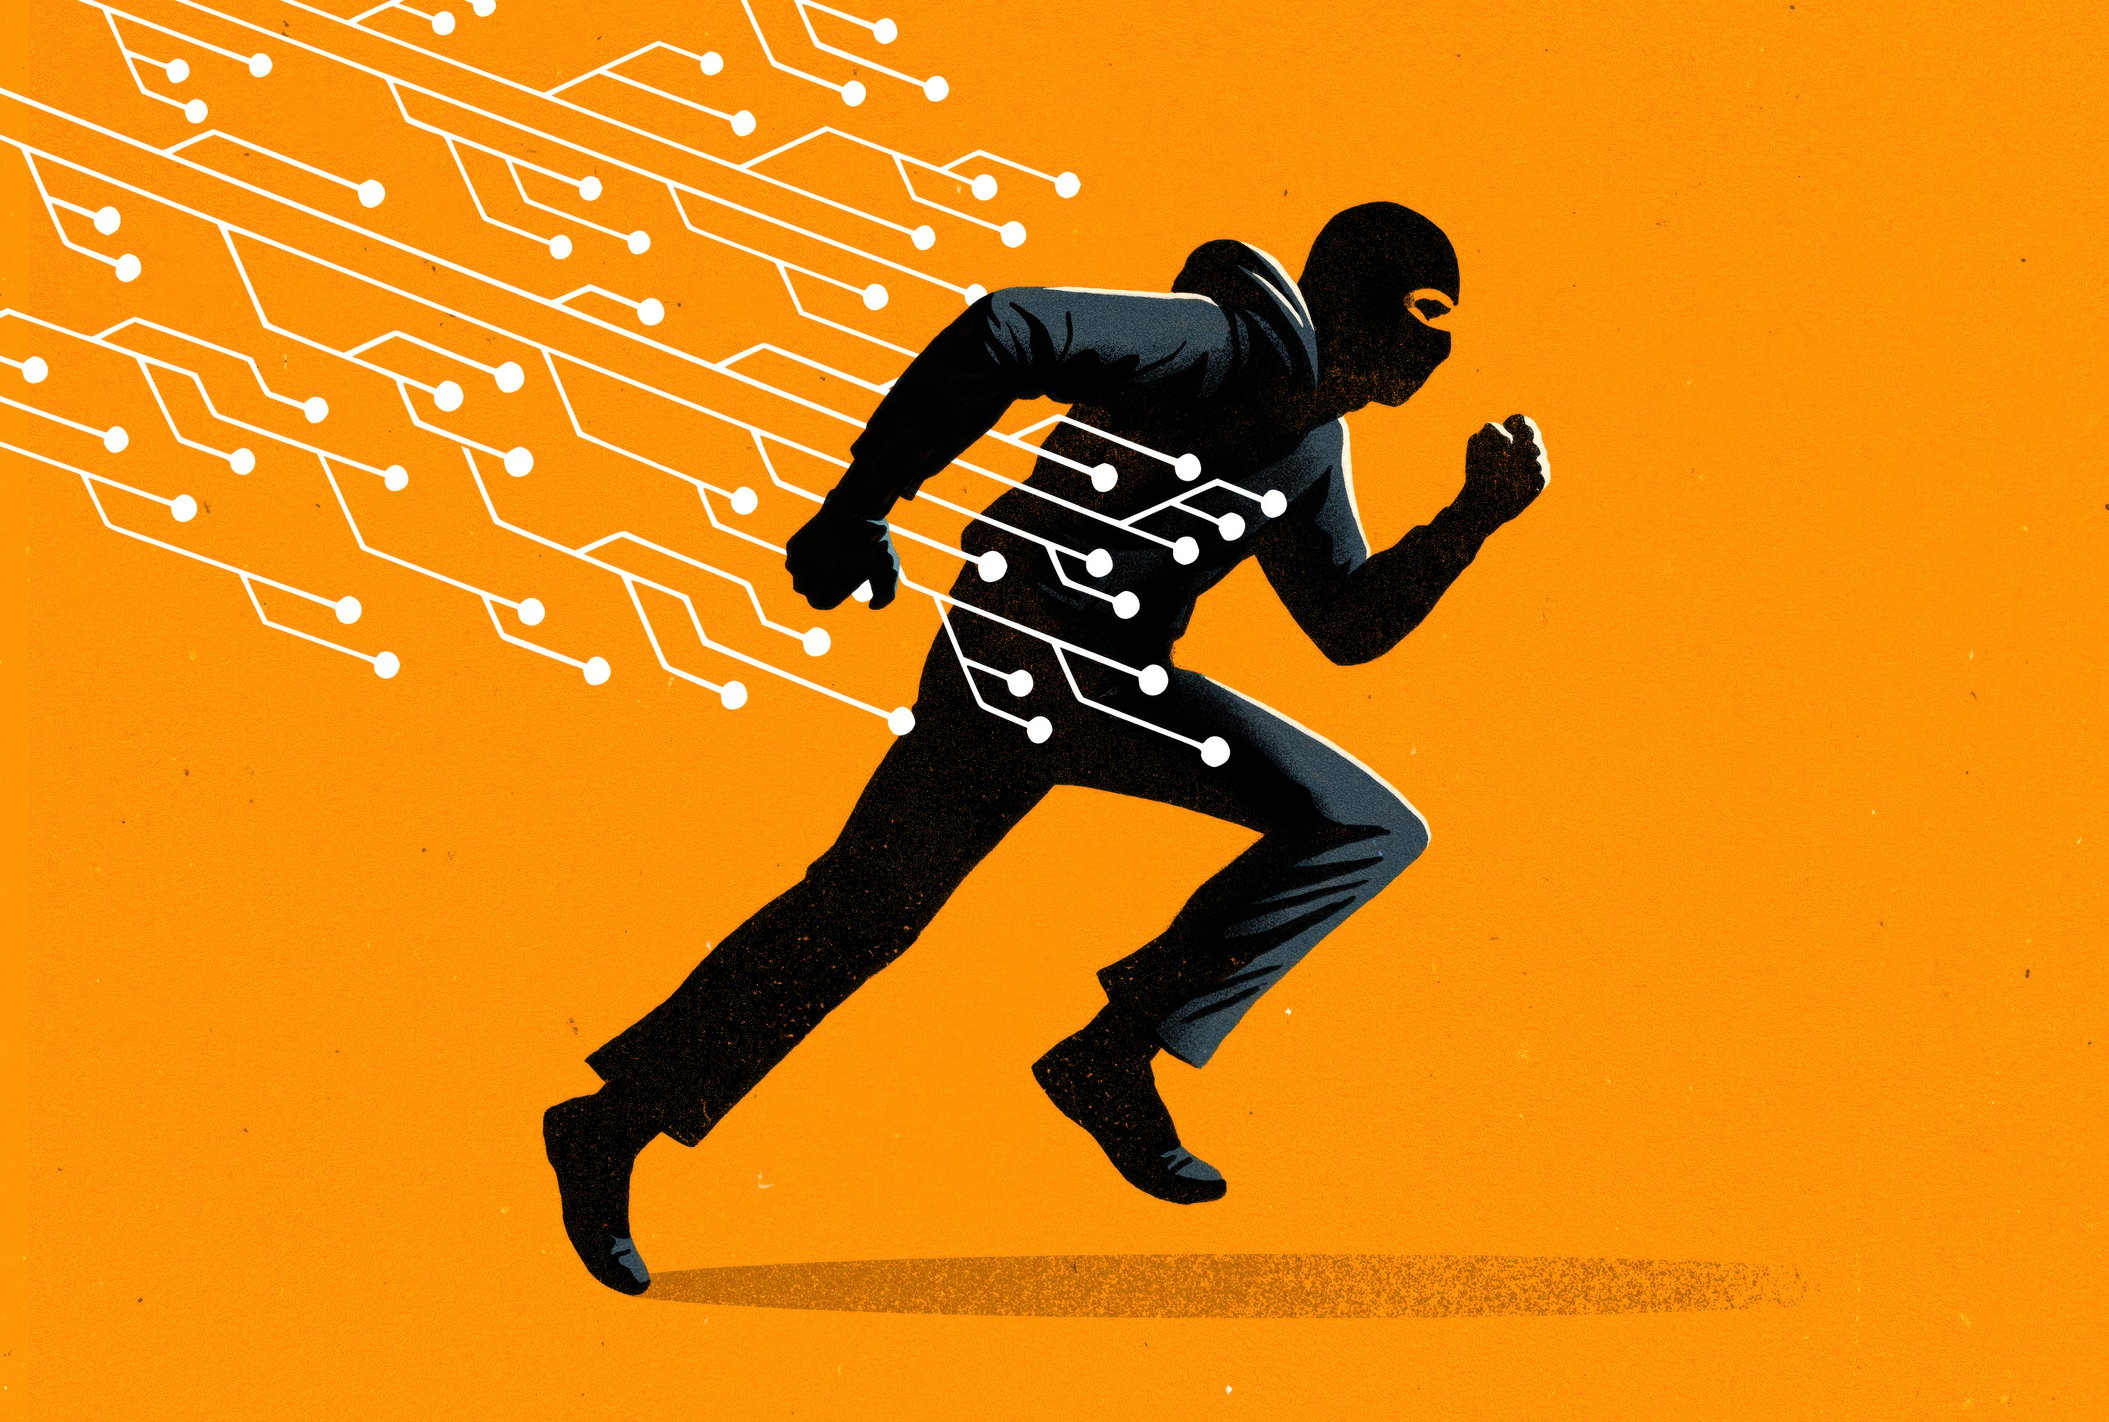 An illustration of a masked thief running while carrying network or technology or circuit board lines.